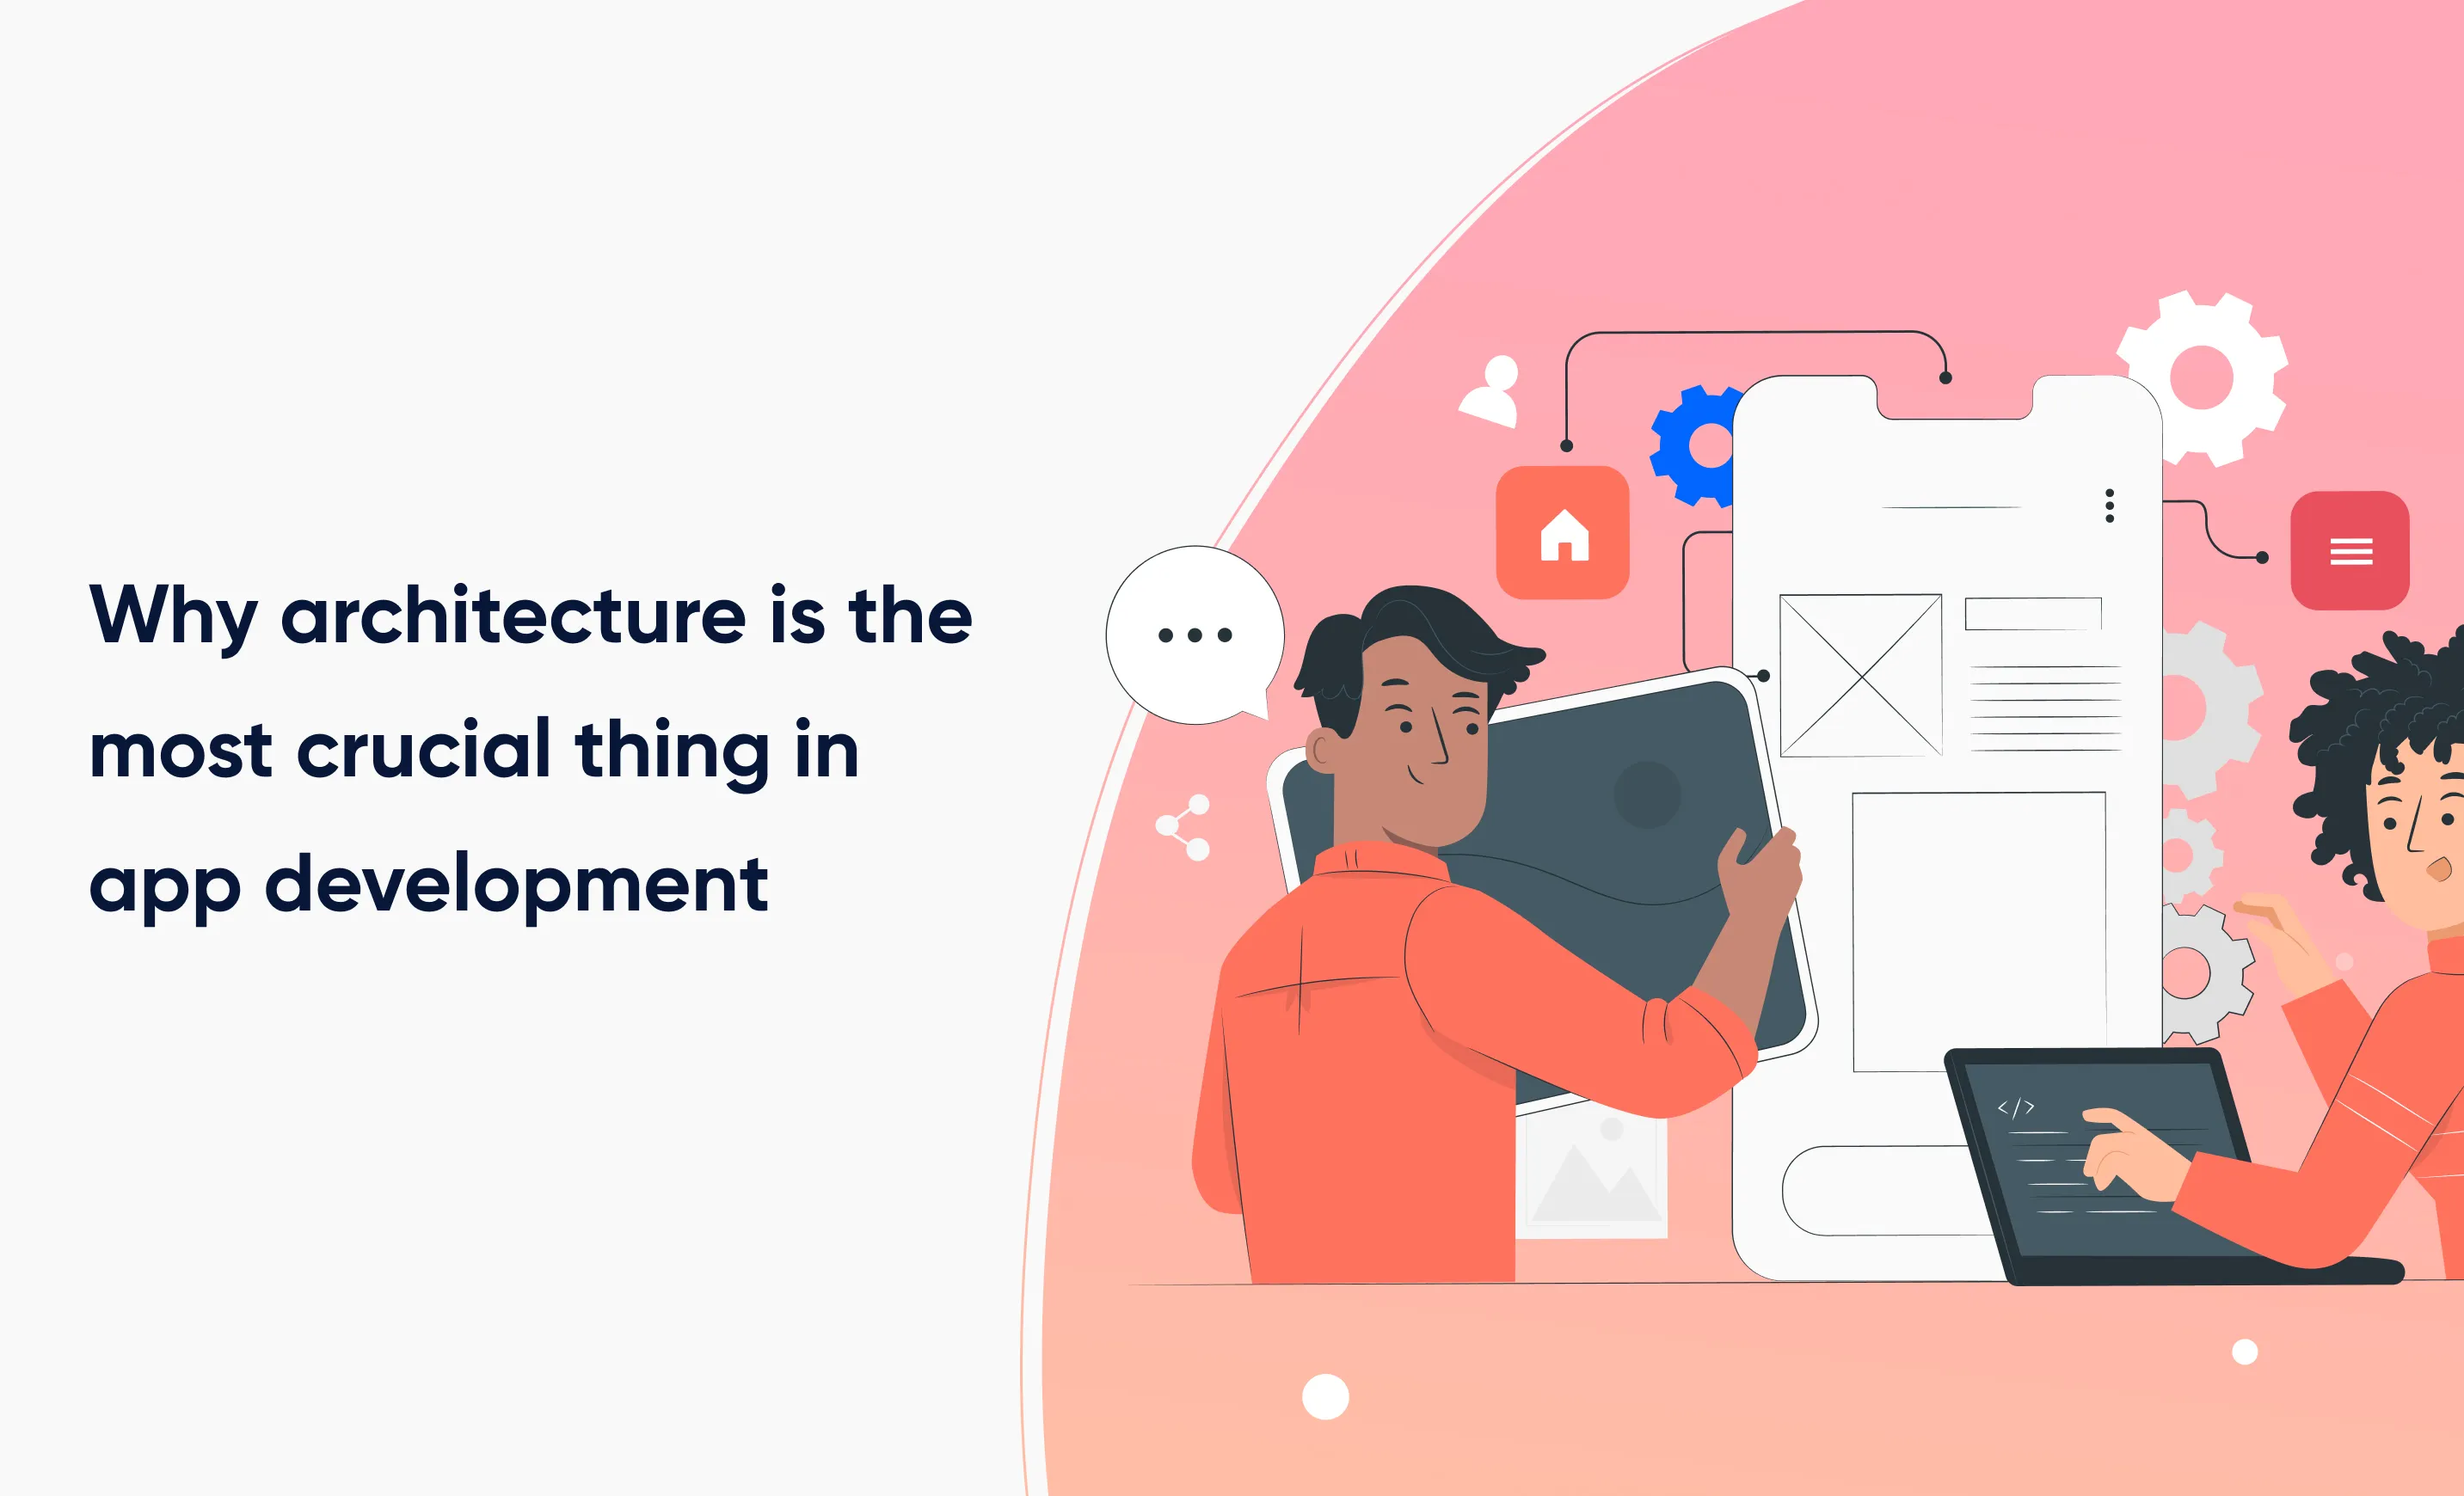 Why architecture is the most crucial thing in app development